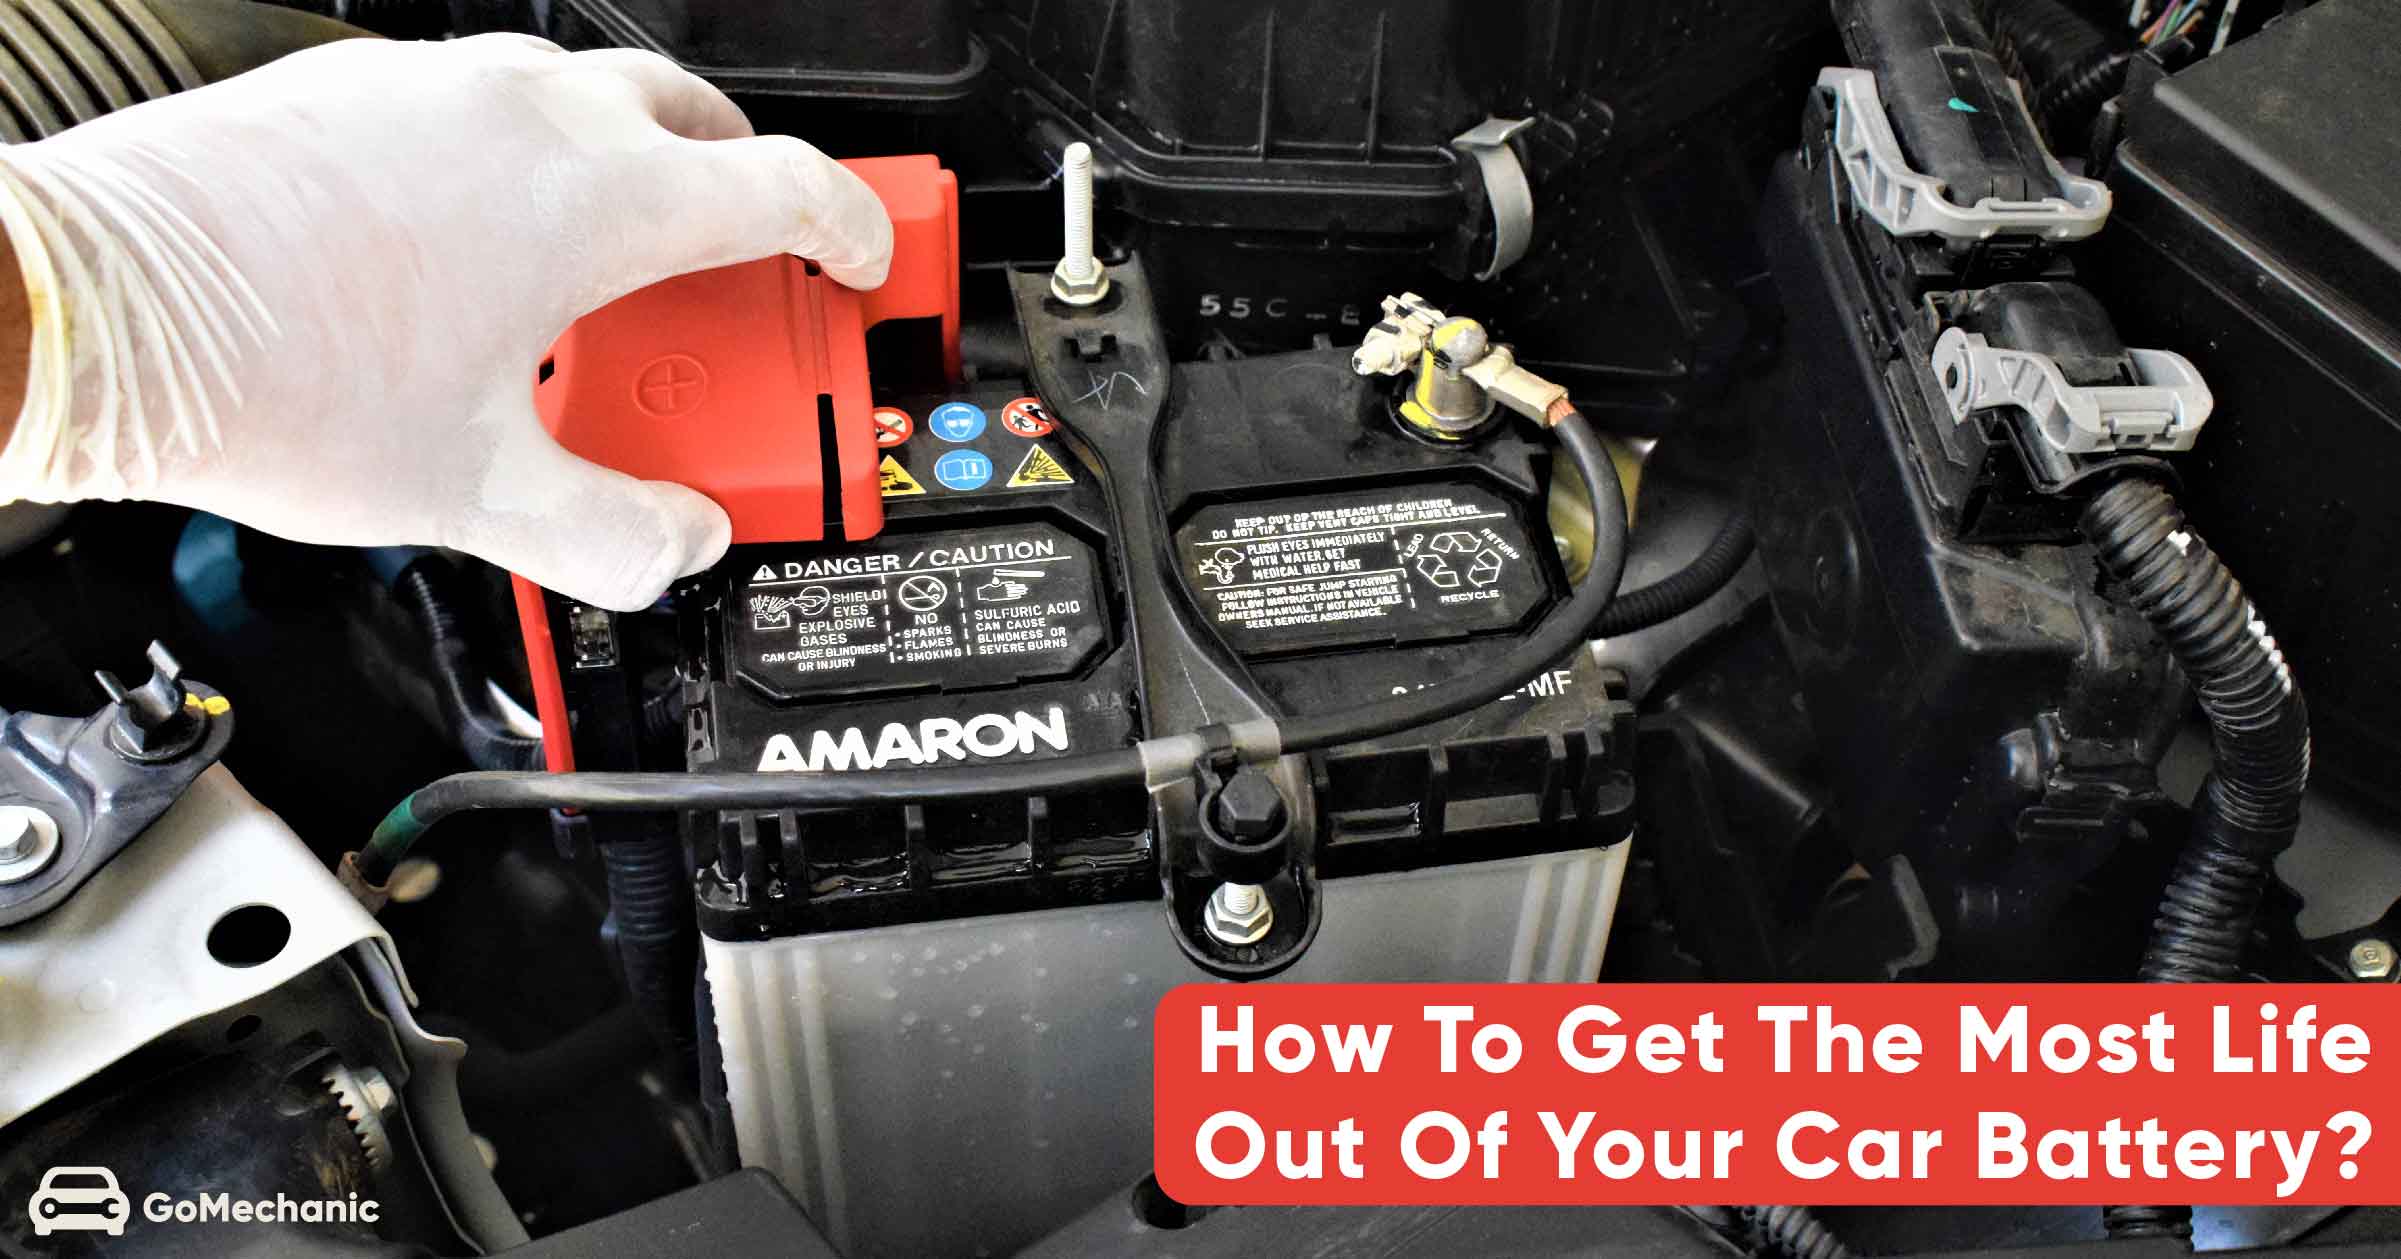 How to get the most life out of your car battery?